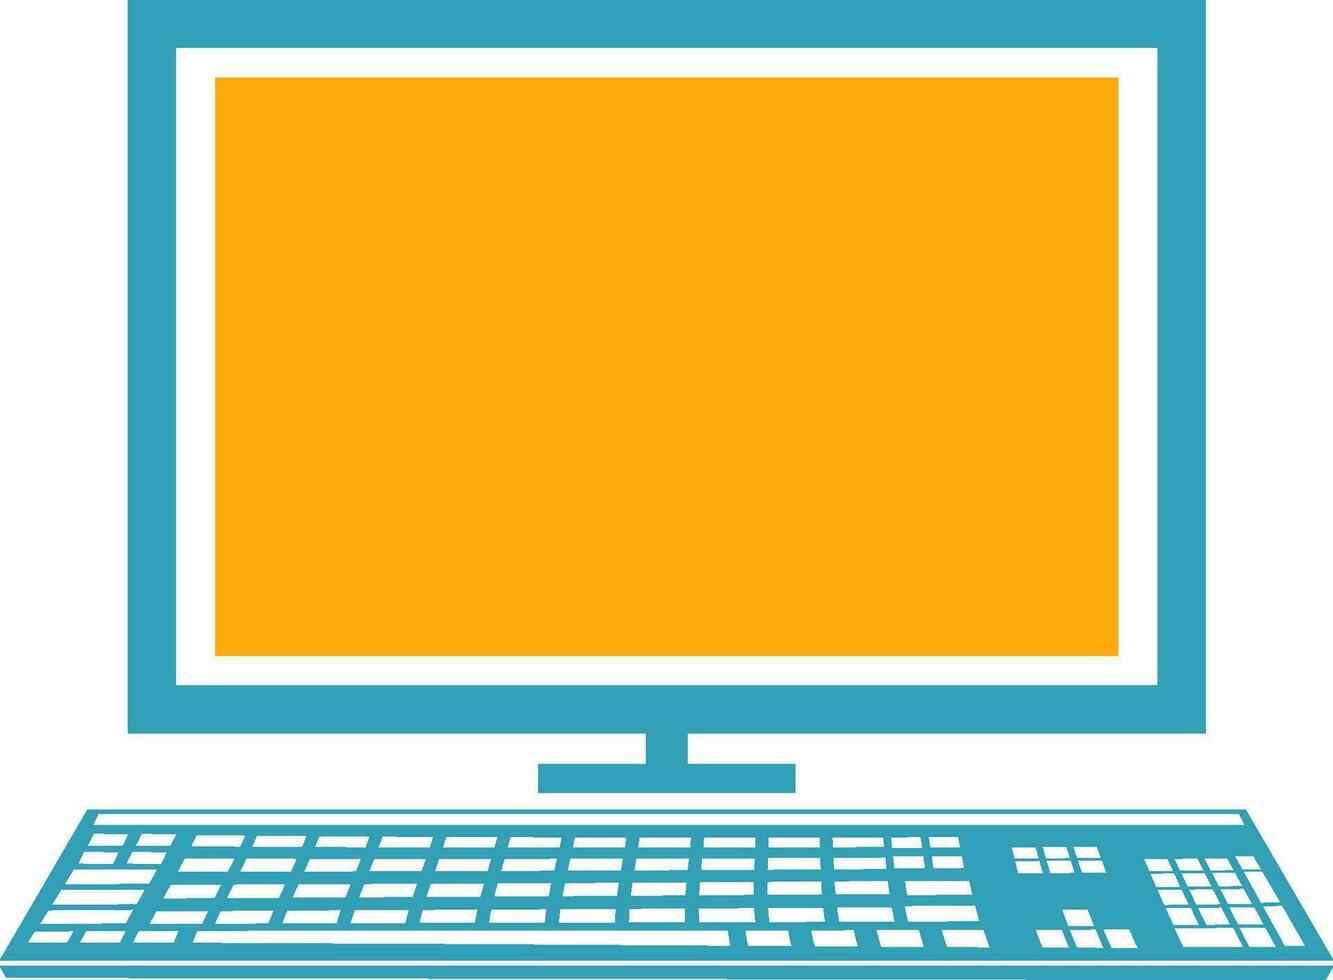 Illustration of computer with keyboard. vector